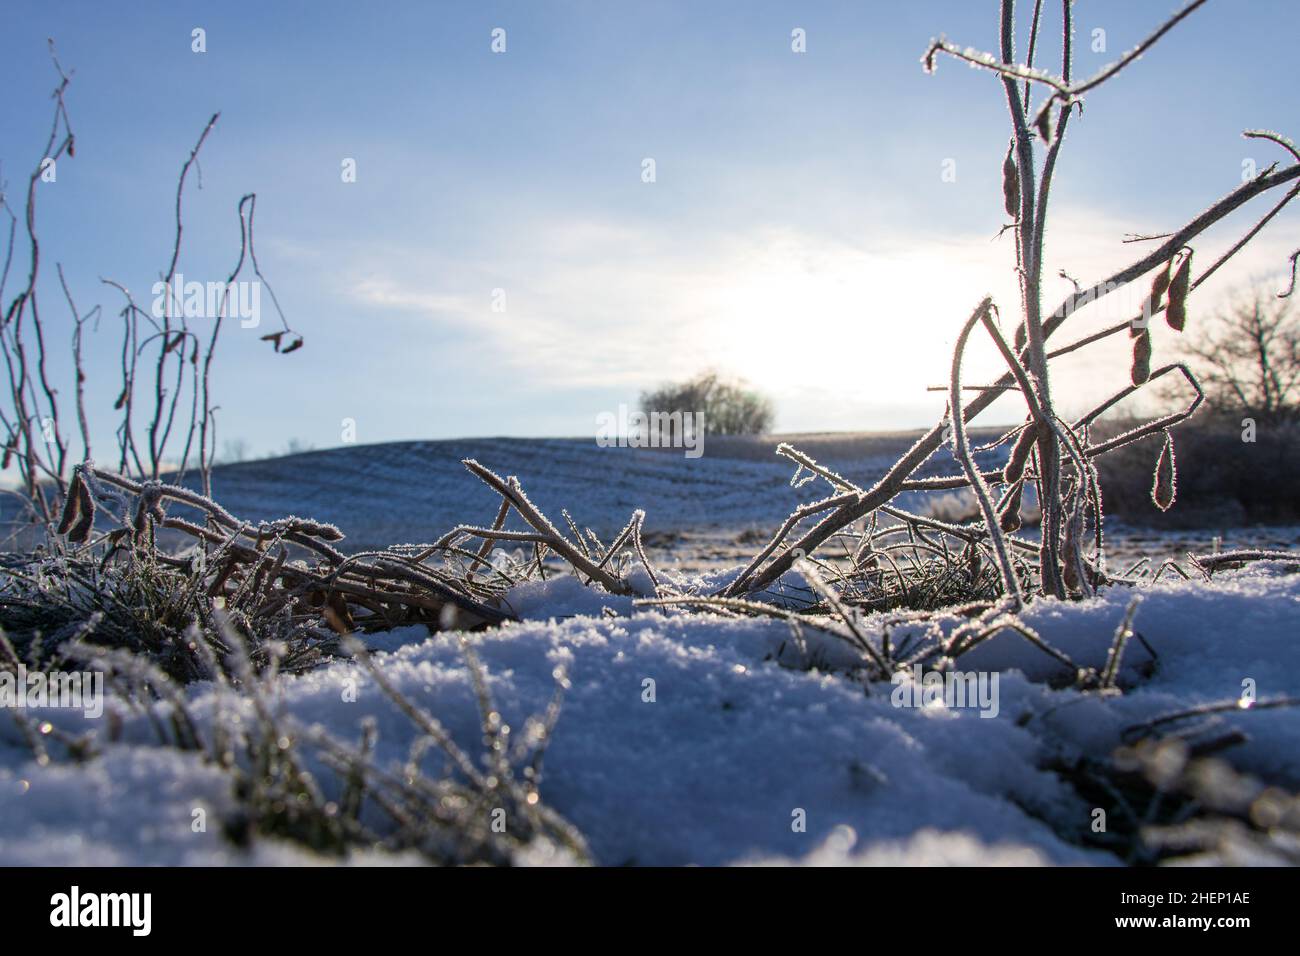 The sun shines through a frosted soybean plant on a snow-covered farmer's field. Stock Photo